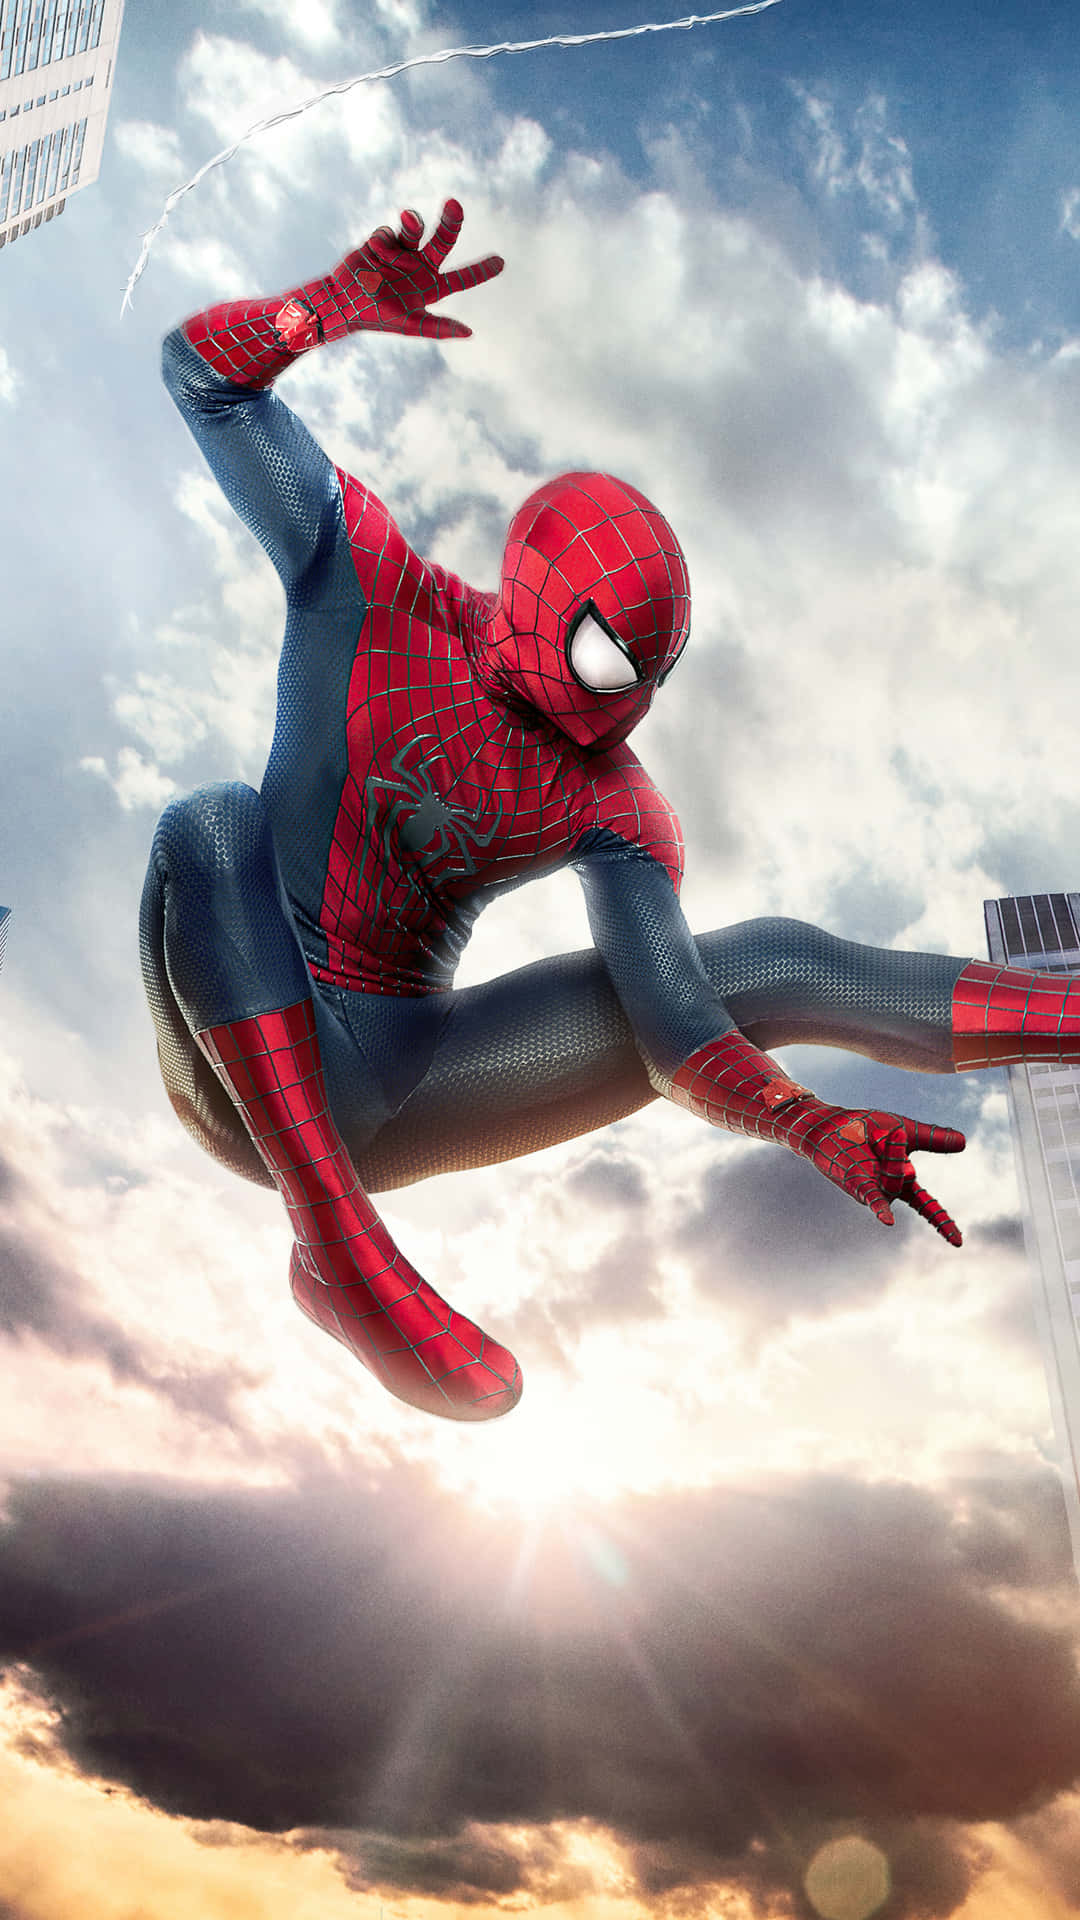 An Incredible Wallpaper of Amazing Spider Man for your iPhone Wallpaper